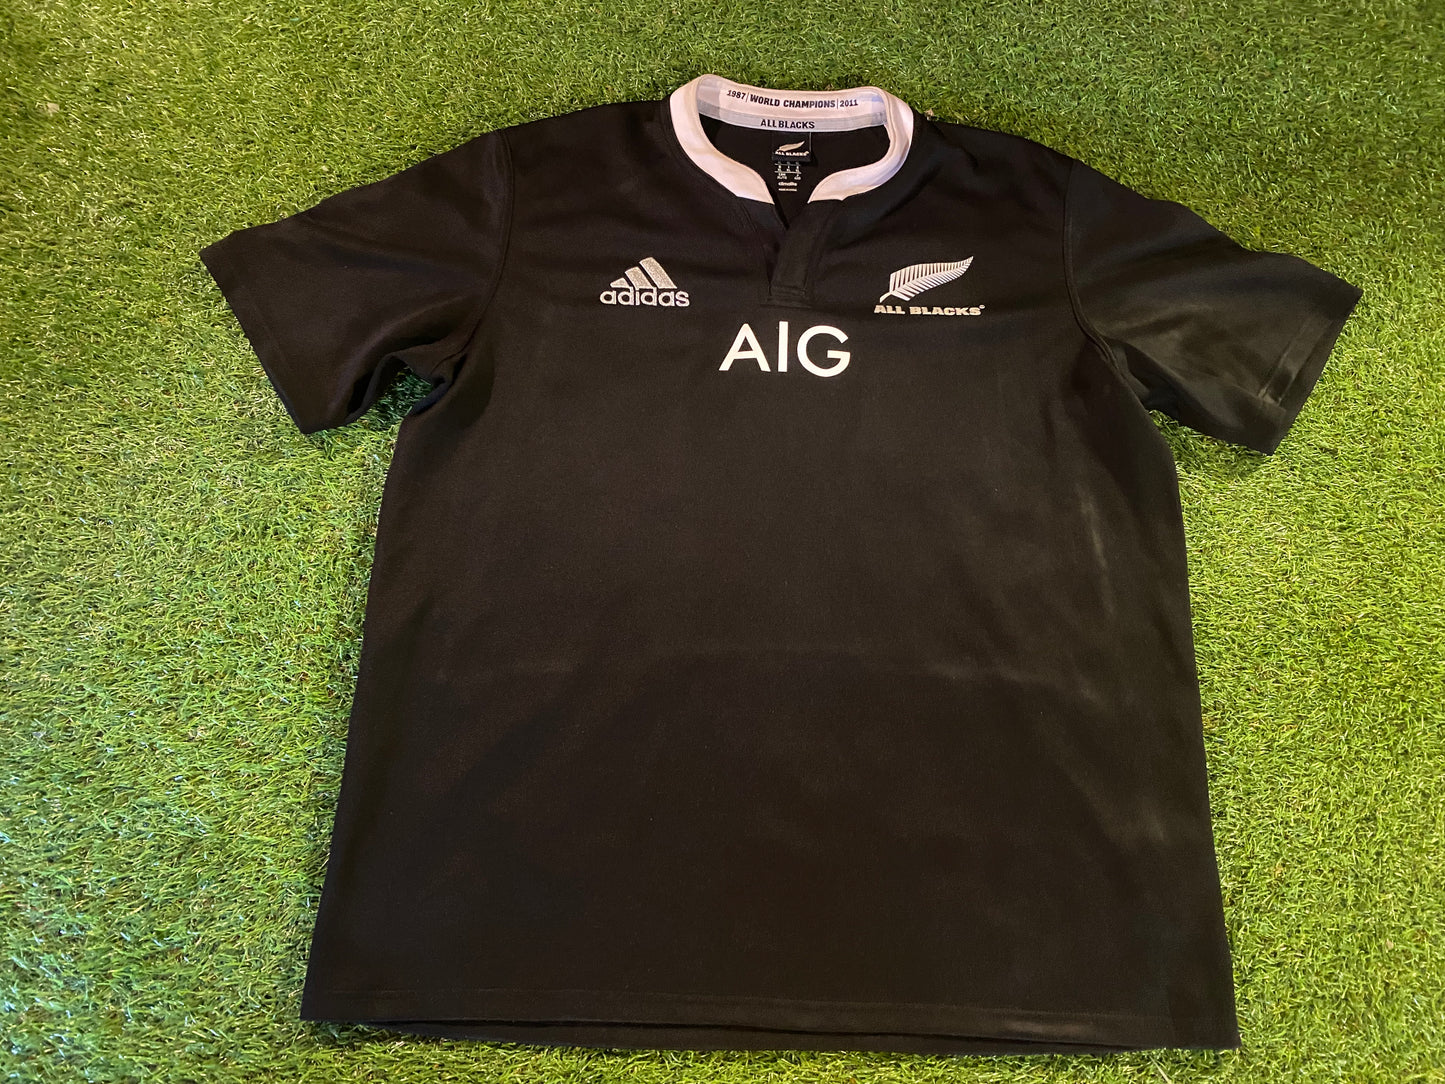 New Zealand All Blacks Rugby Union Football XL Extra Large Mans Adidas Home Jersey